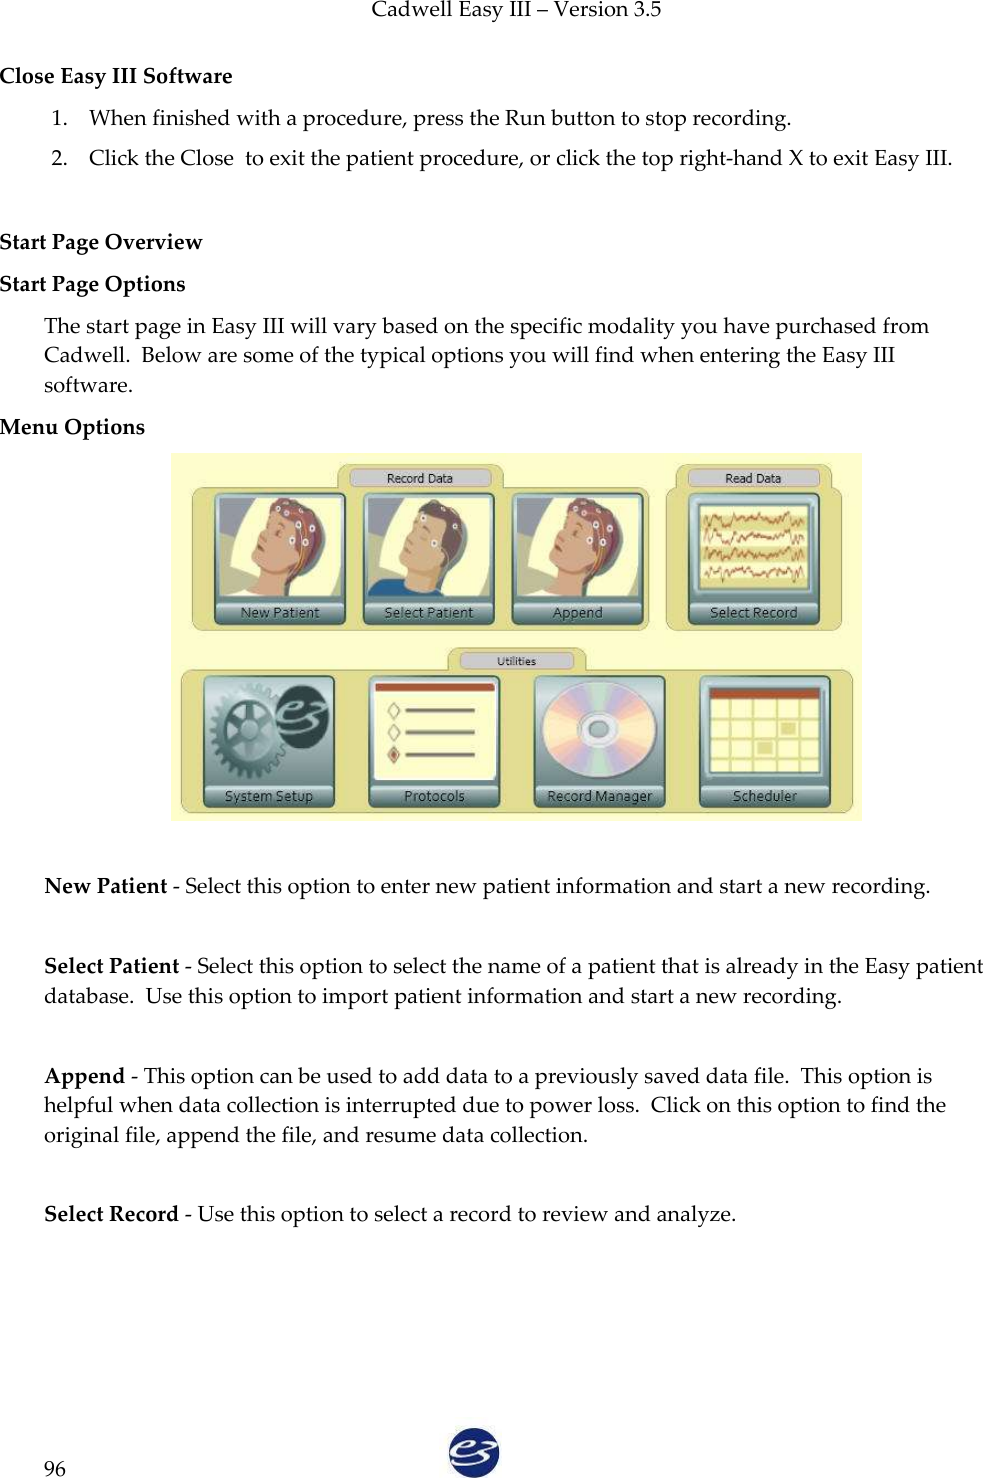 Cadwell Easy III – Version 3.5   96 Close Easy III Software 1. When finished with a procedure, press the Run button to stop recording. 2. Click the Close  to exit the patient procedure, or click the top right-hand X to exit Easy III.   Start Page Overview Start Page Options The start page in Easy III will vary based on the specific modality you have purchased from Cadwell.  Below are some of the typical options you will find when entering the Easy III software. Menu Options   New Patient - Select this option to enter new patient information and start a new recording.  Select Patient - Select this option to select the name of a patient that is already in the Easy patient database.  Use this option to import patient information and start a new recording.  Append - This option can be used to add data to a previously saved data file.  This option is helpful when data collection is interrupted due to power loss.  Click on this option to find the original file, append the file, and resume data collection.  Select Record - Use this option to select a record to review and analyze.  